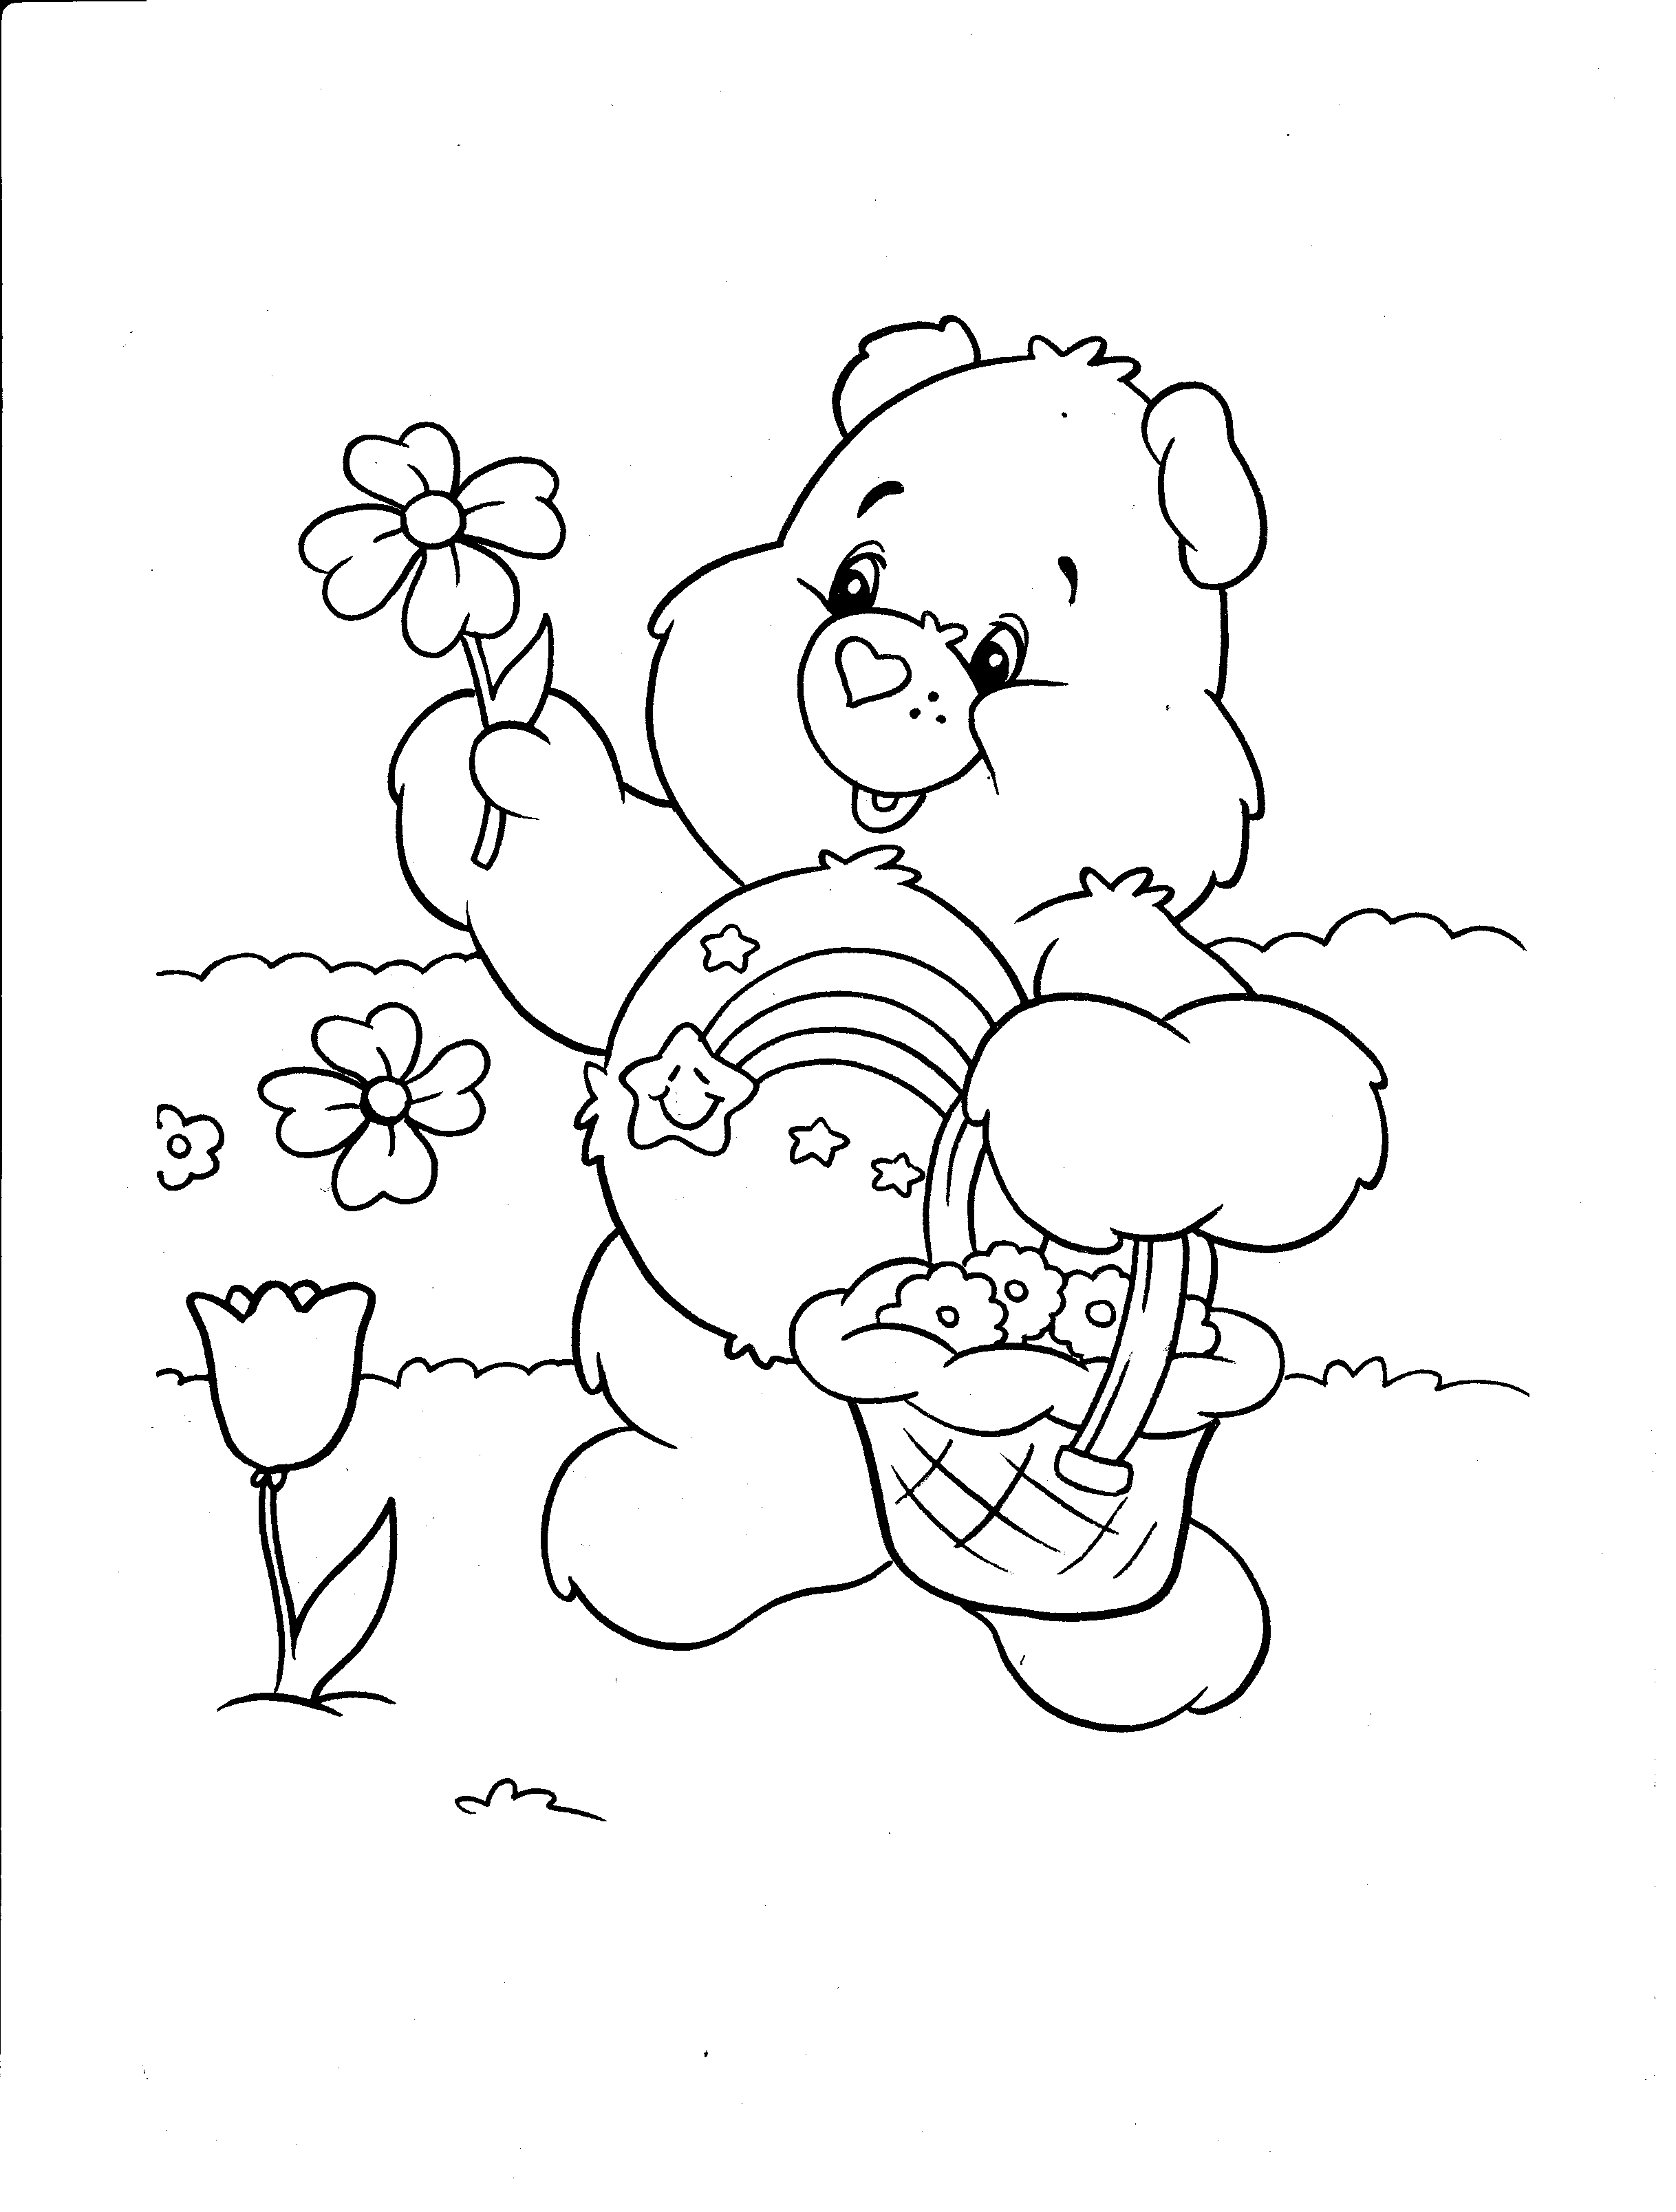 care-bears-printable-coloring-pages-printable-blog-calendar-here